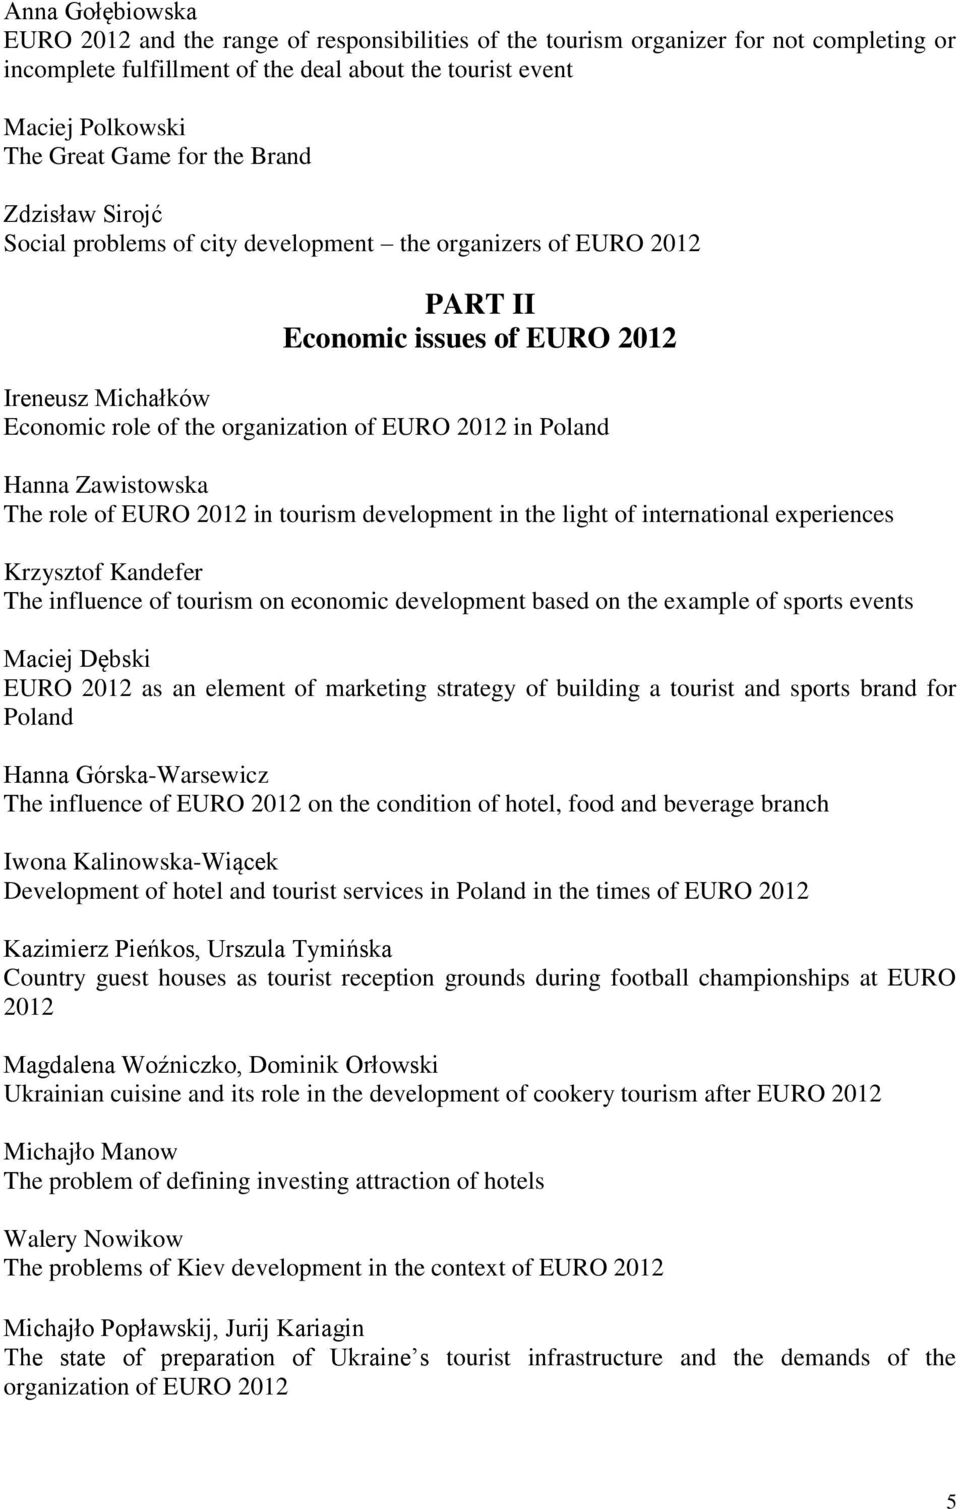 Zawistowska The role of EURO 2012 in tourism development in the light of international experiences Krzysztof Kandefer The influence of tourism on economic development based on the example of sports